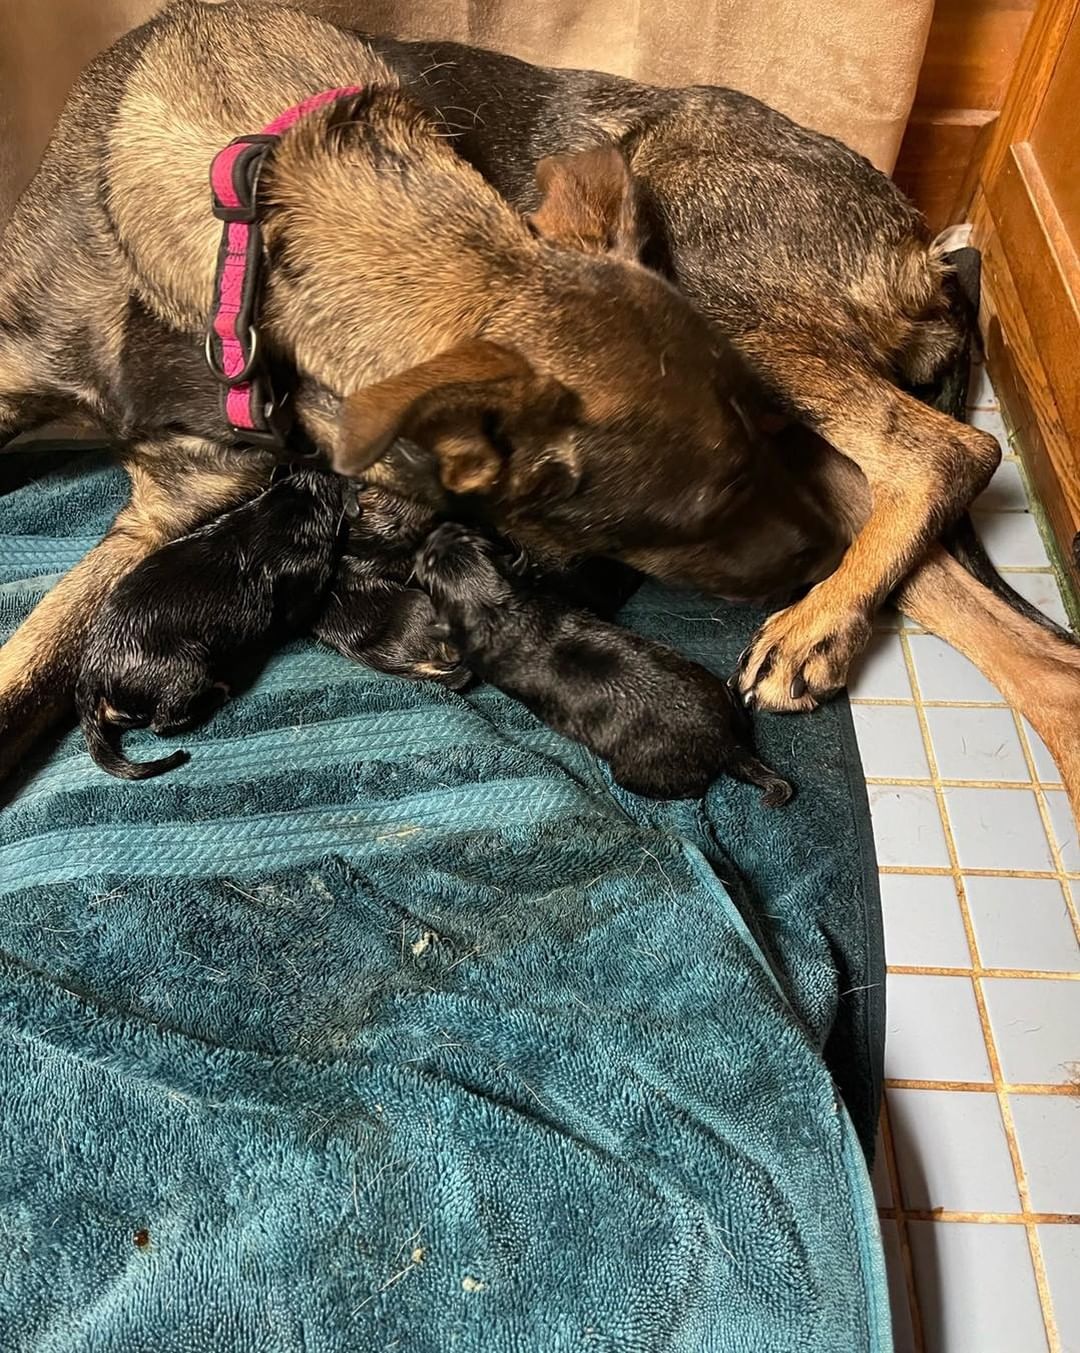 And this also happened today...7 puppies joined this crazy world and are with the amazing Val. We pulled a pup from Houston BARC, we were not told she was preggo. Thank goodness we saved her or else it would have been 8 lives murdered!! 

Please help us cover the costs of vetting, food and transport for this family - PayPal @pawsfromafar or Venmo @pawsfromafar 

This family needs a foster, please contact me if you can assist. Thanks 🐾🐾🐾🐾 

<a target='_blank' href='https://www.instagram.com/explore/tags/puppiesofinstagram/'>#puppiesofinstagram</a> <a target='_blank' href='https://www.instagram.com/explore/tags/puppylove/'>#puppylove</a> <a target='_blank' href='https://www.instagram.com/explore/tags/adoptdontshop/'>#adoptdontshop</a> <a target='_blank' href='https://www.instagram.com/explore/tags/muttsofinstagram/'>#muttsofinstagram</a> <a target='_blank' href='https://www.instagram.com/explore/tags/newborn/'>#newborn</a> <a target='_blank' href='https://www.instagram.com/explore/tags/rescuedogsofinstagram/'>#rescuedogsofinstagram</a> <a target='_blank' href='https://www.instagram.com/explore/tags/rescuedismyfavoritebreed/'>#rescuedismyfavoritebreed</a> <a target='_blank' href='https://www.instagram.com/explore/tags/rescue/'>#rescue</a> <a target='_blank' href='https://www.instagram.com/explore/tags/rescuedog/'>#rescuedog</a> <a target='_blank' href='https://www.instagram.com/explore/tags/rescuedogsrock/'>#rescuedogsrock</a>